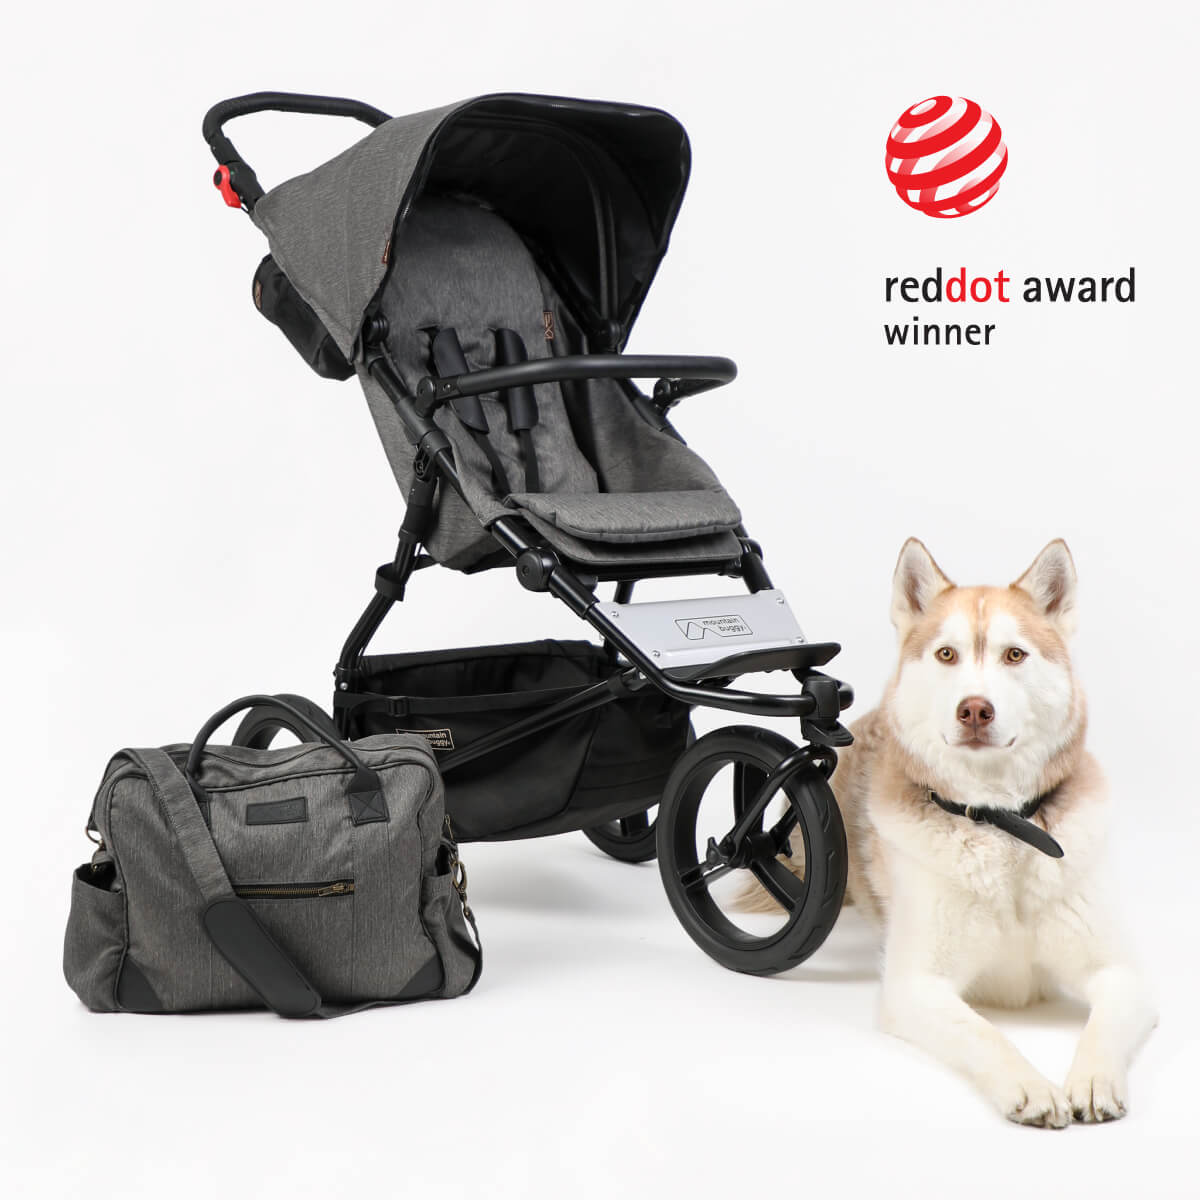 Red Dot award winnera thoughtful bundle from newborn to toddlercomplimentary warrantyparent facing options in one luxurious bundleworld class in safety and stability